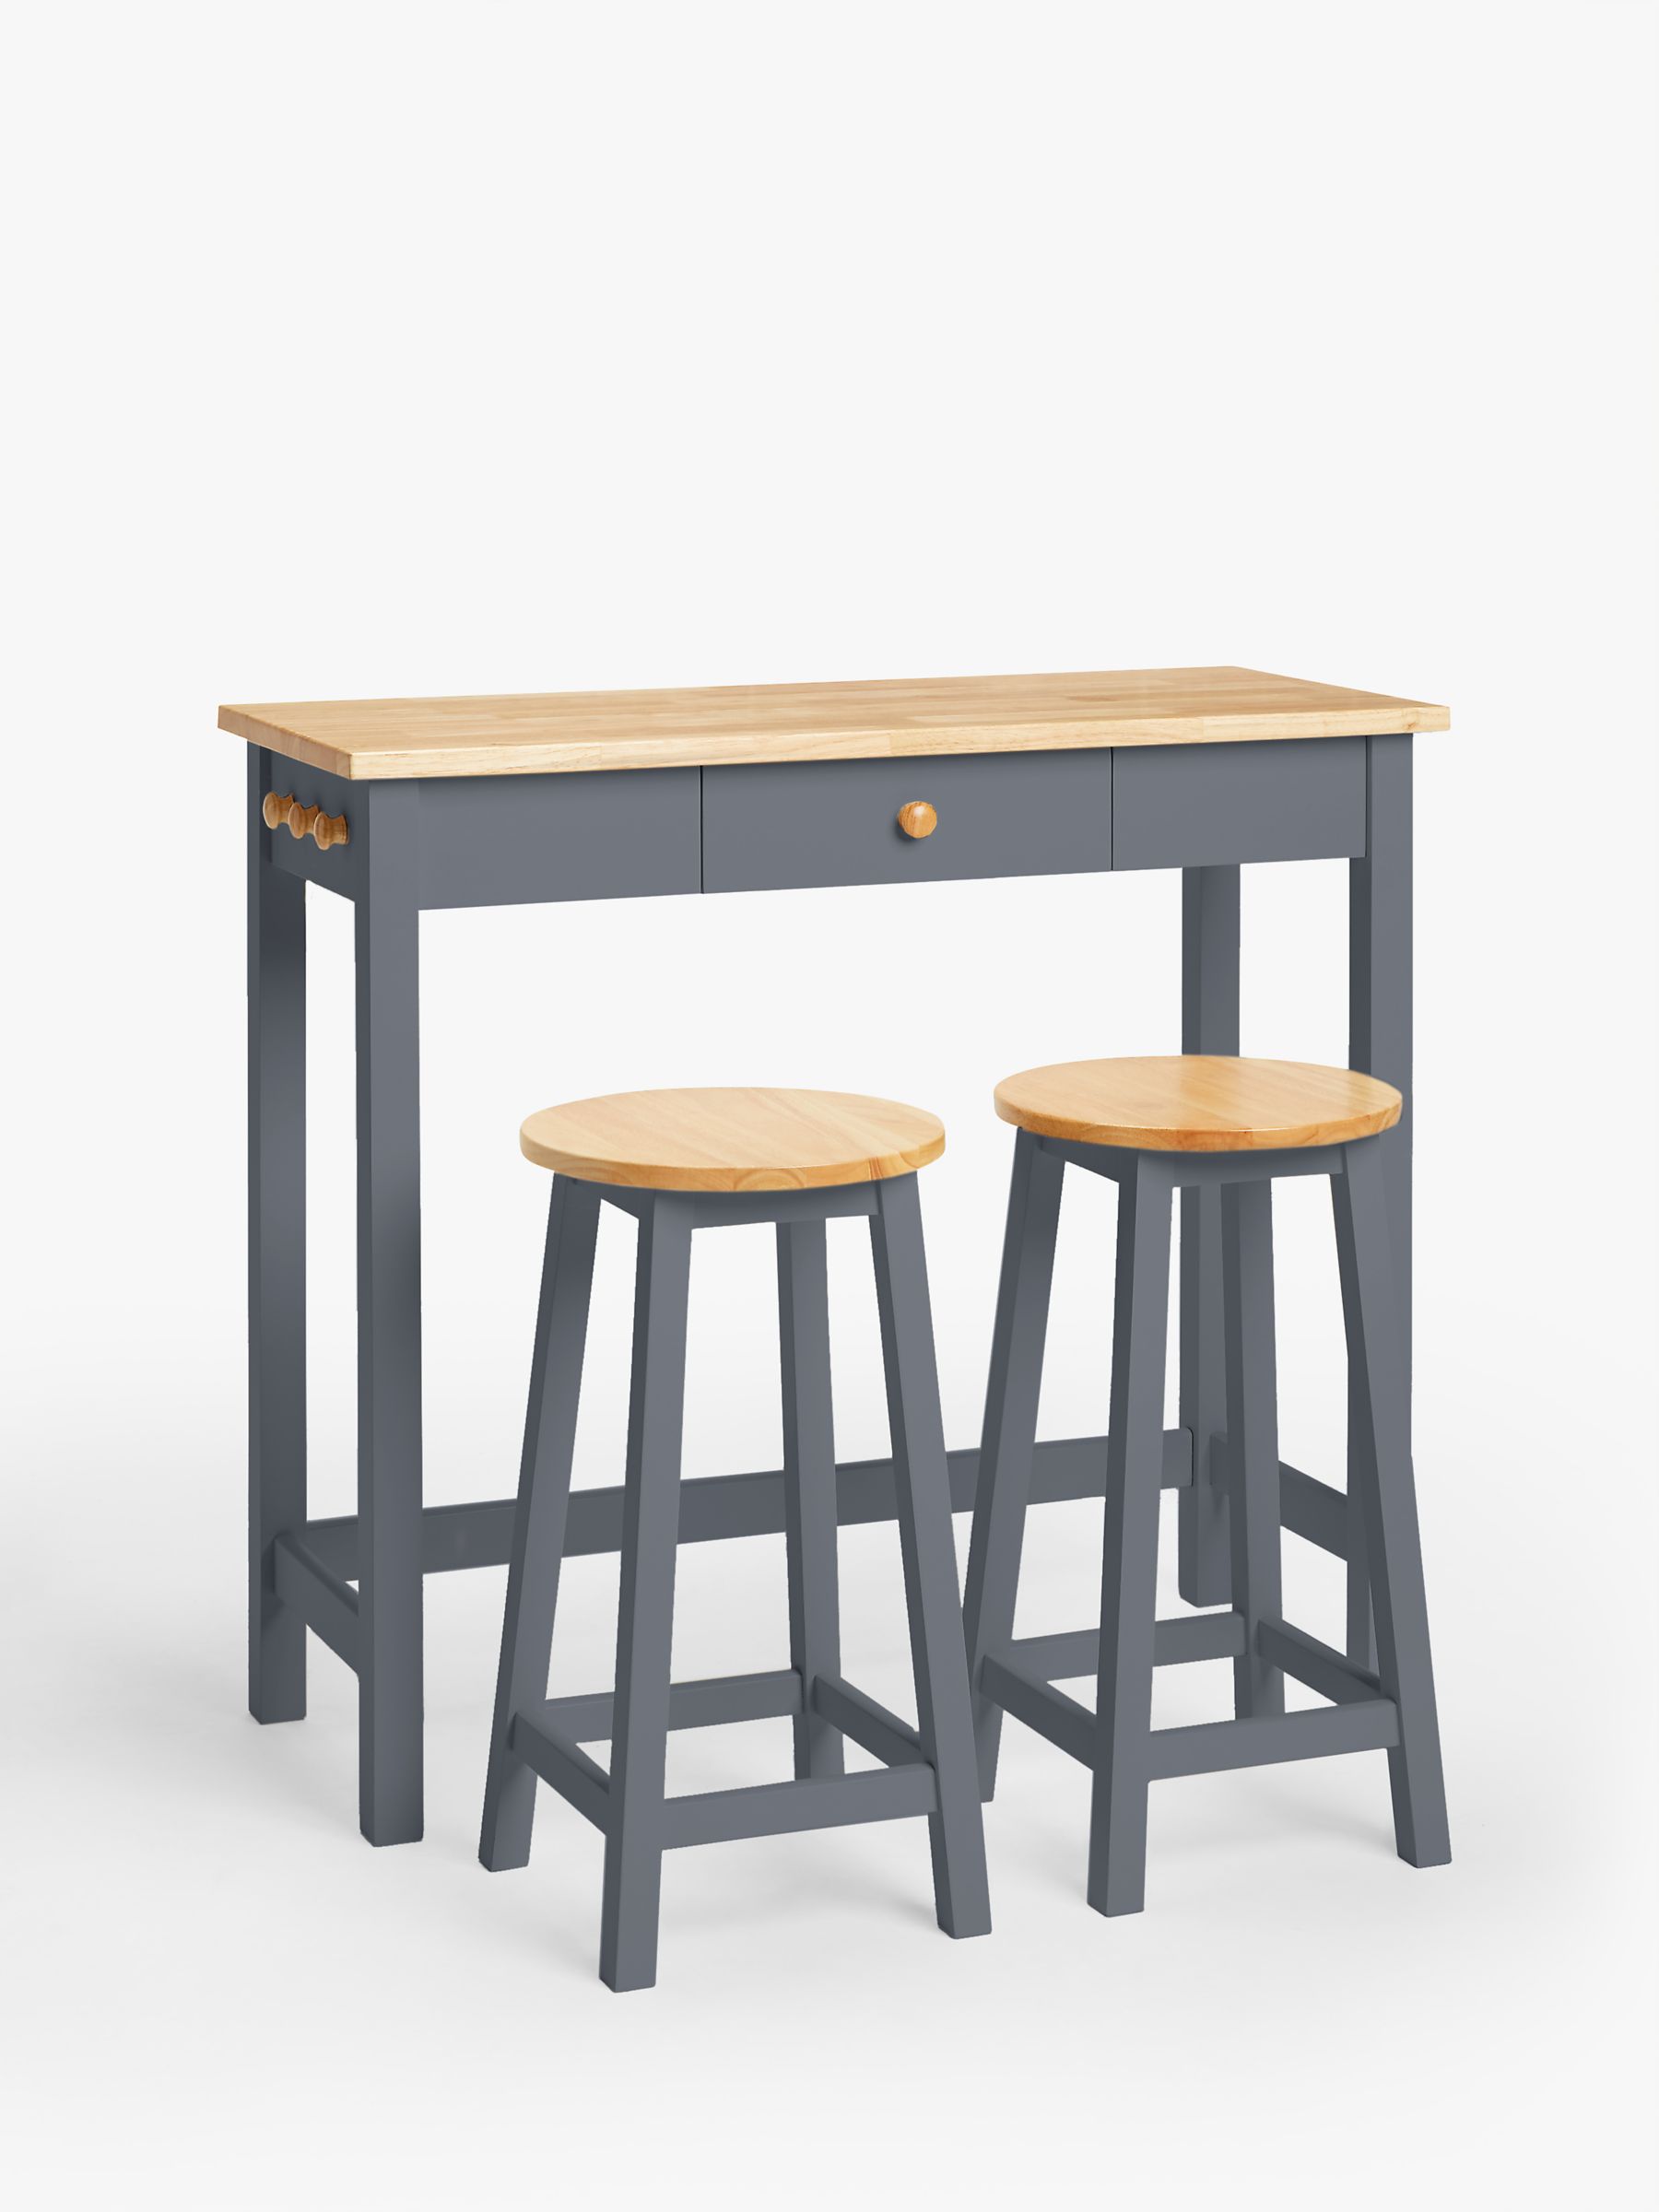 Anyday John Lewis Partners Adler Bar, Wooden Bar Table And Stools